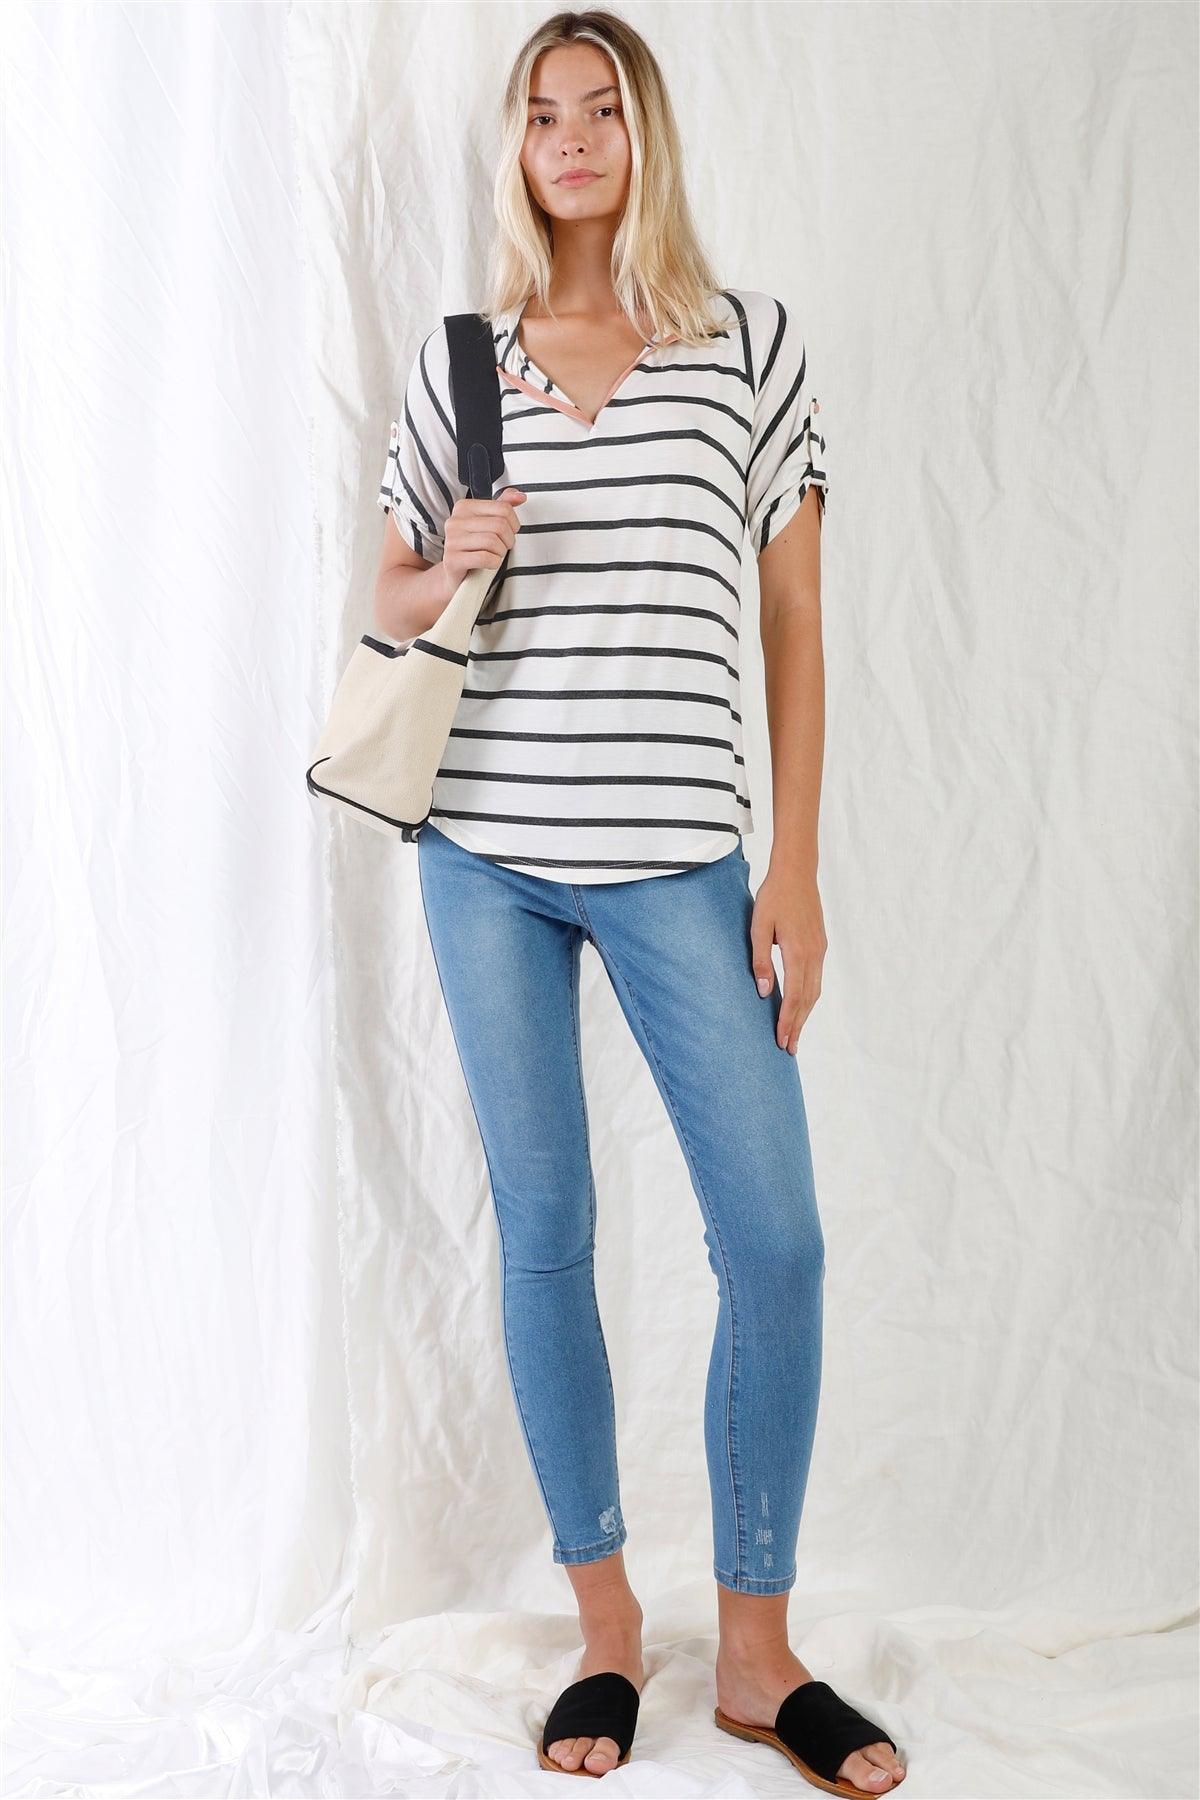 Light Blue High-Waisted With Rips Skinny Denim Jeans /1-1-3-3-2-1-1